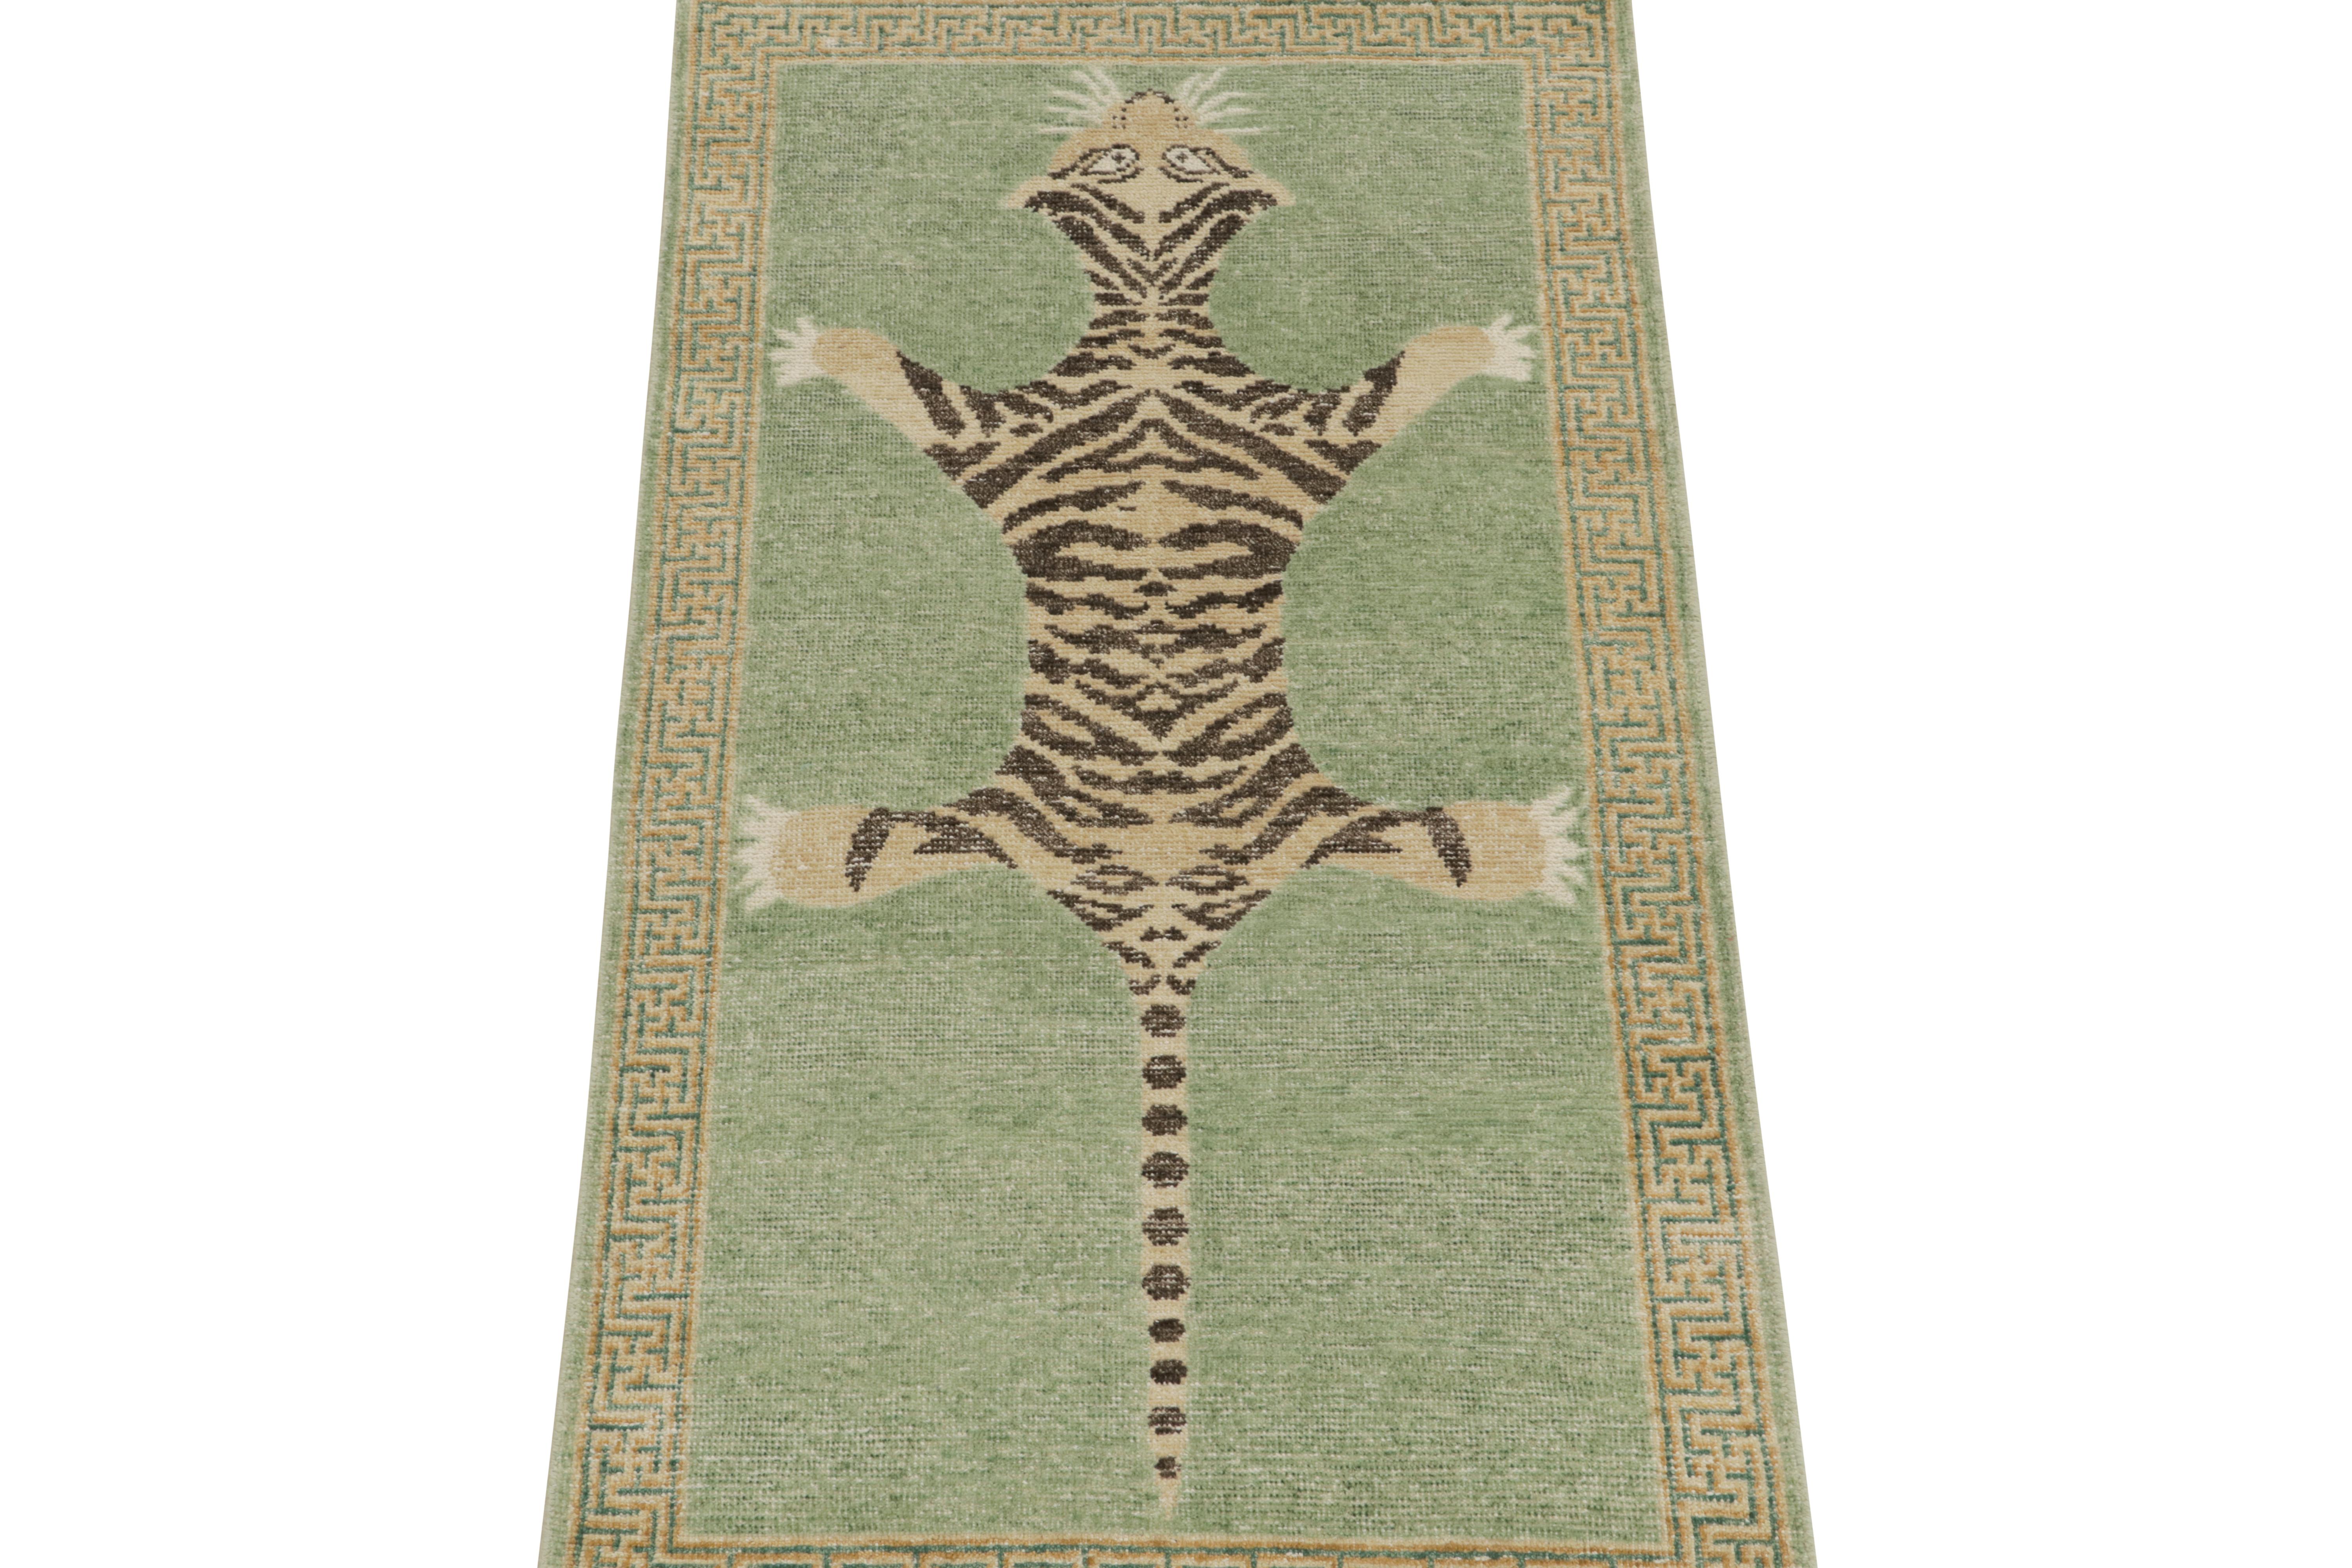 Indian Rug & Kilim’s Distressed Style Tiger Runner in Green, Beige & Black Pictorial For Sale